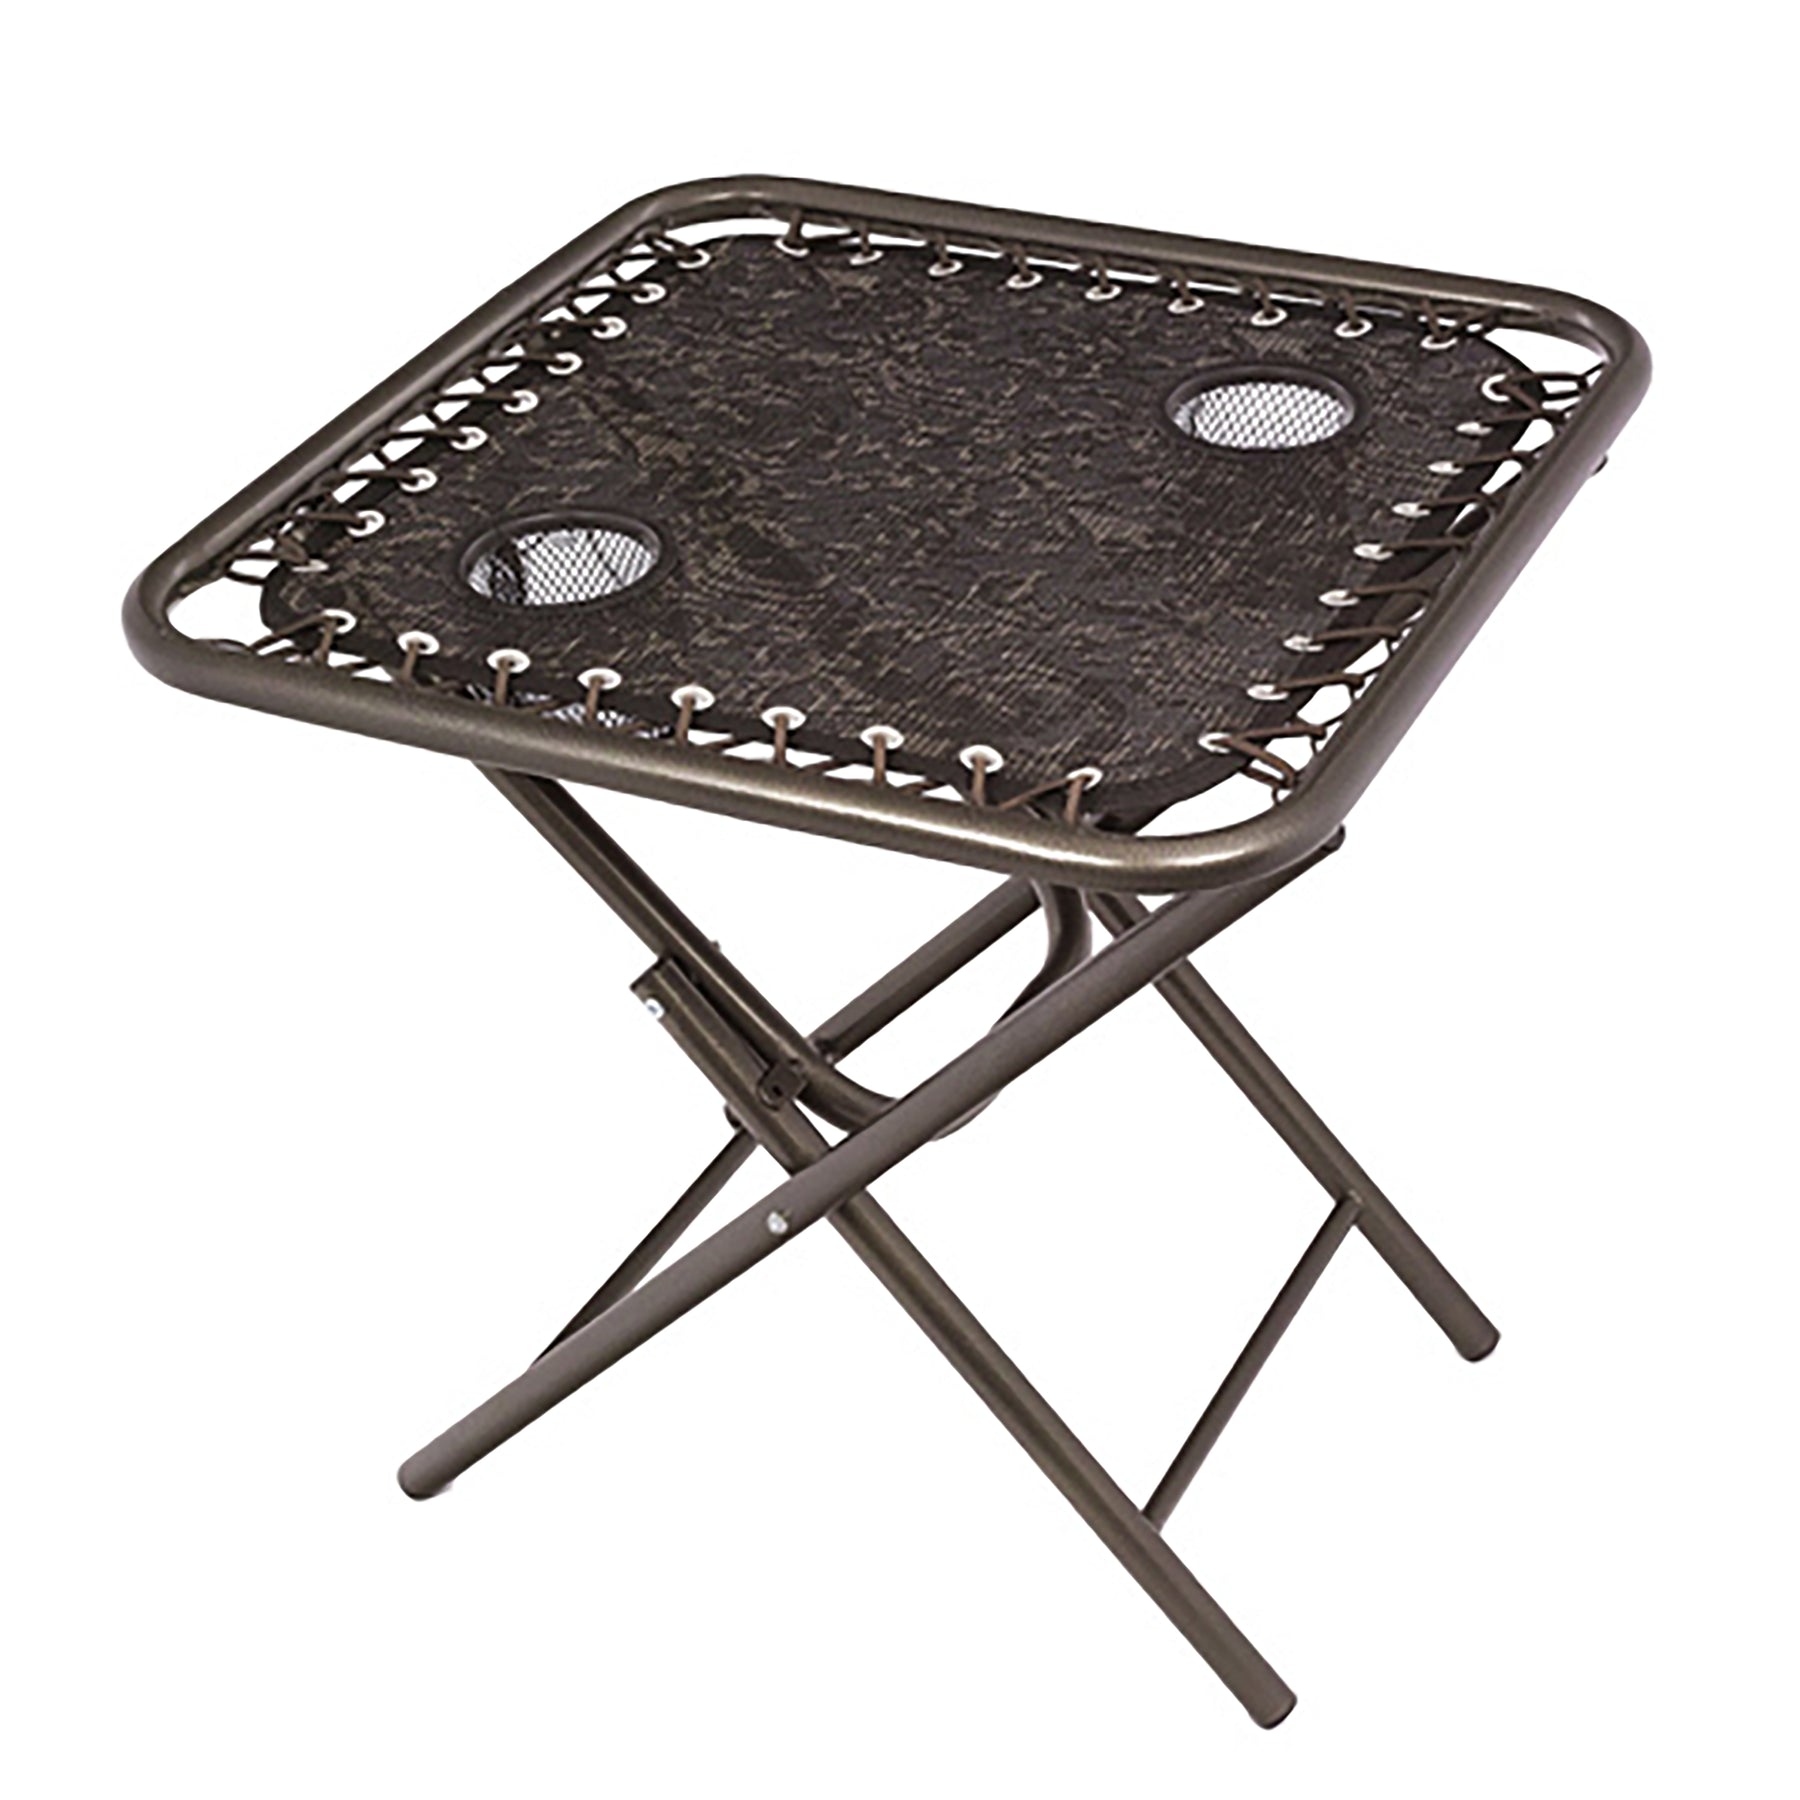 Bliss Hammocks 20-inch Folding Side Table with 2 Built-In Cup Holders in the brown jacquard variation.